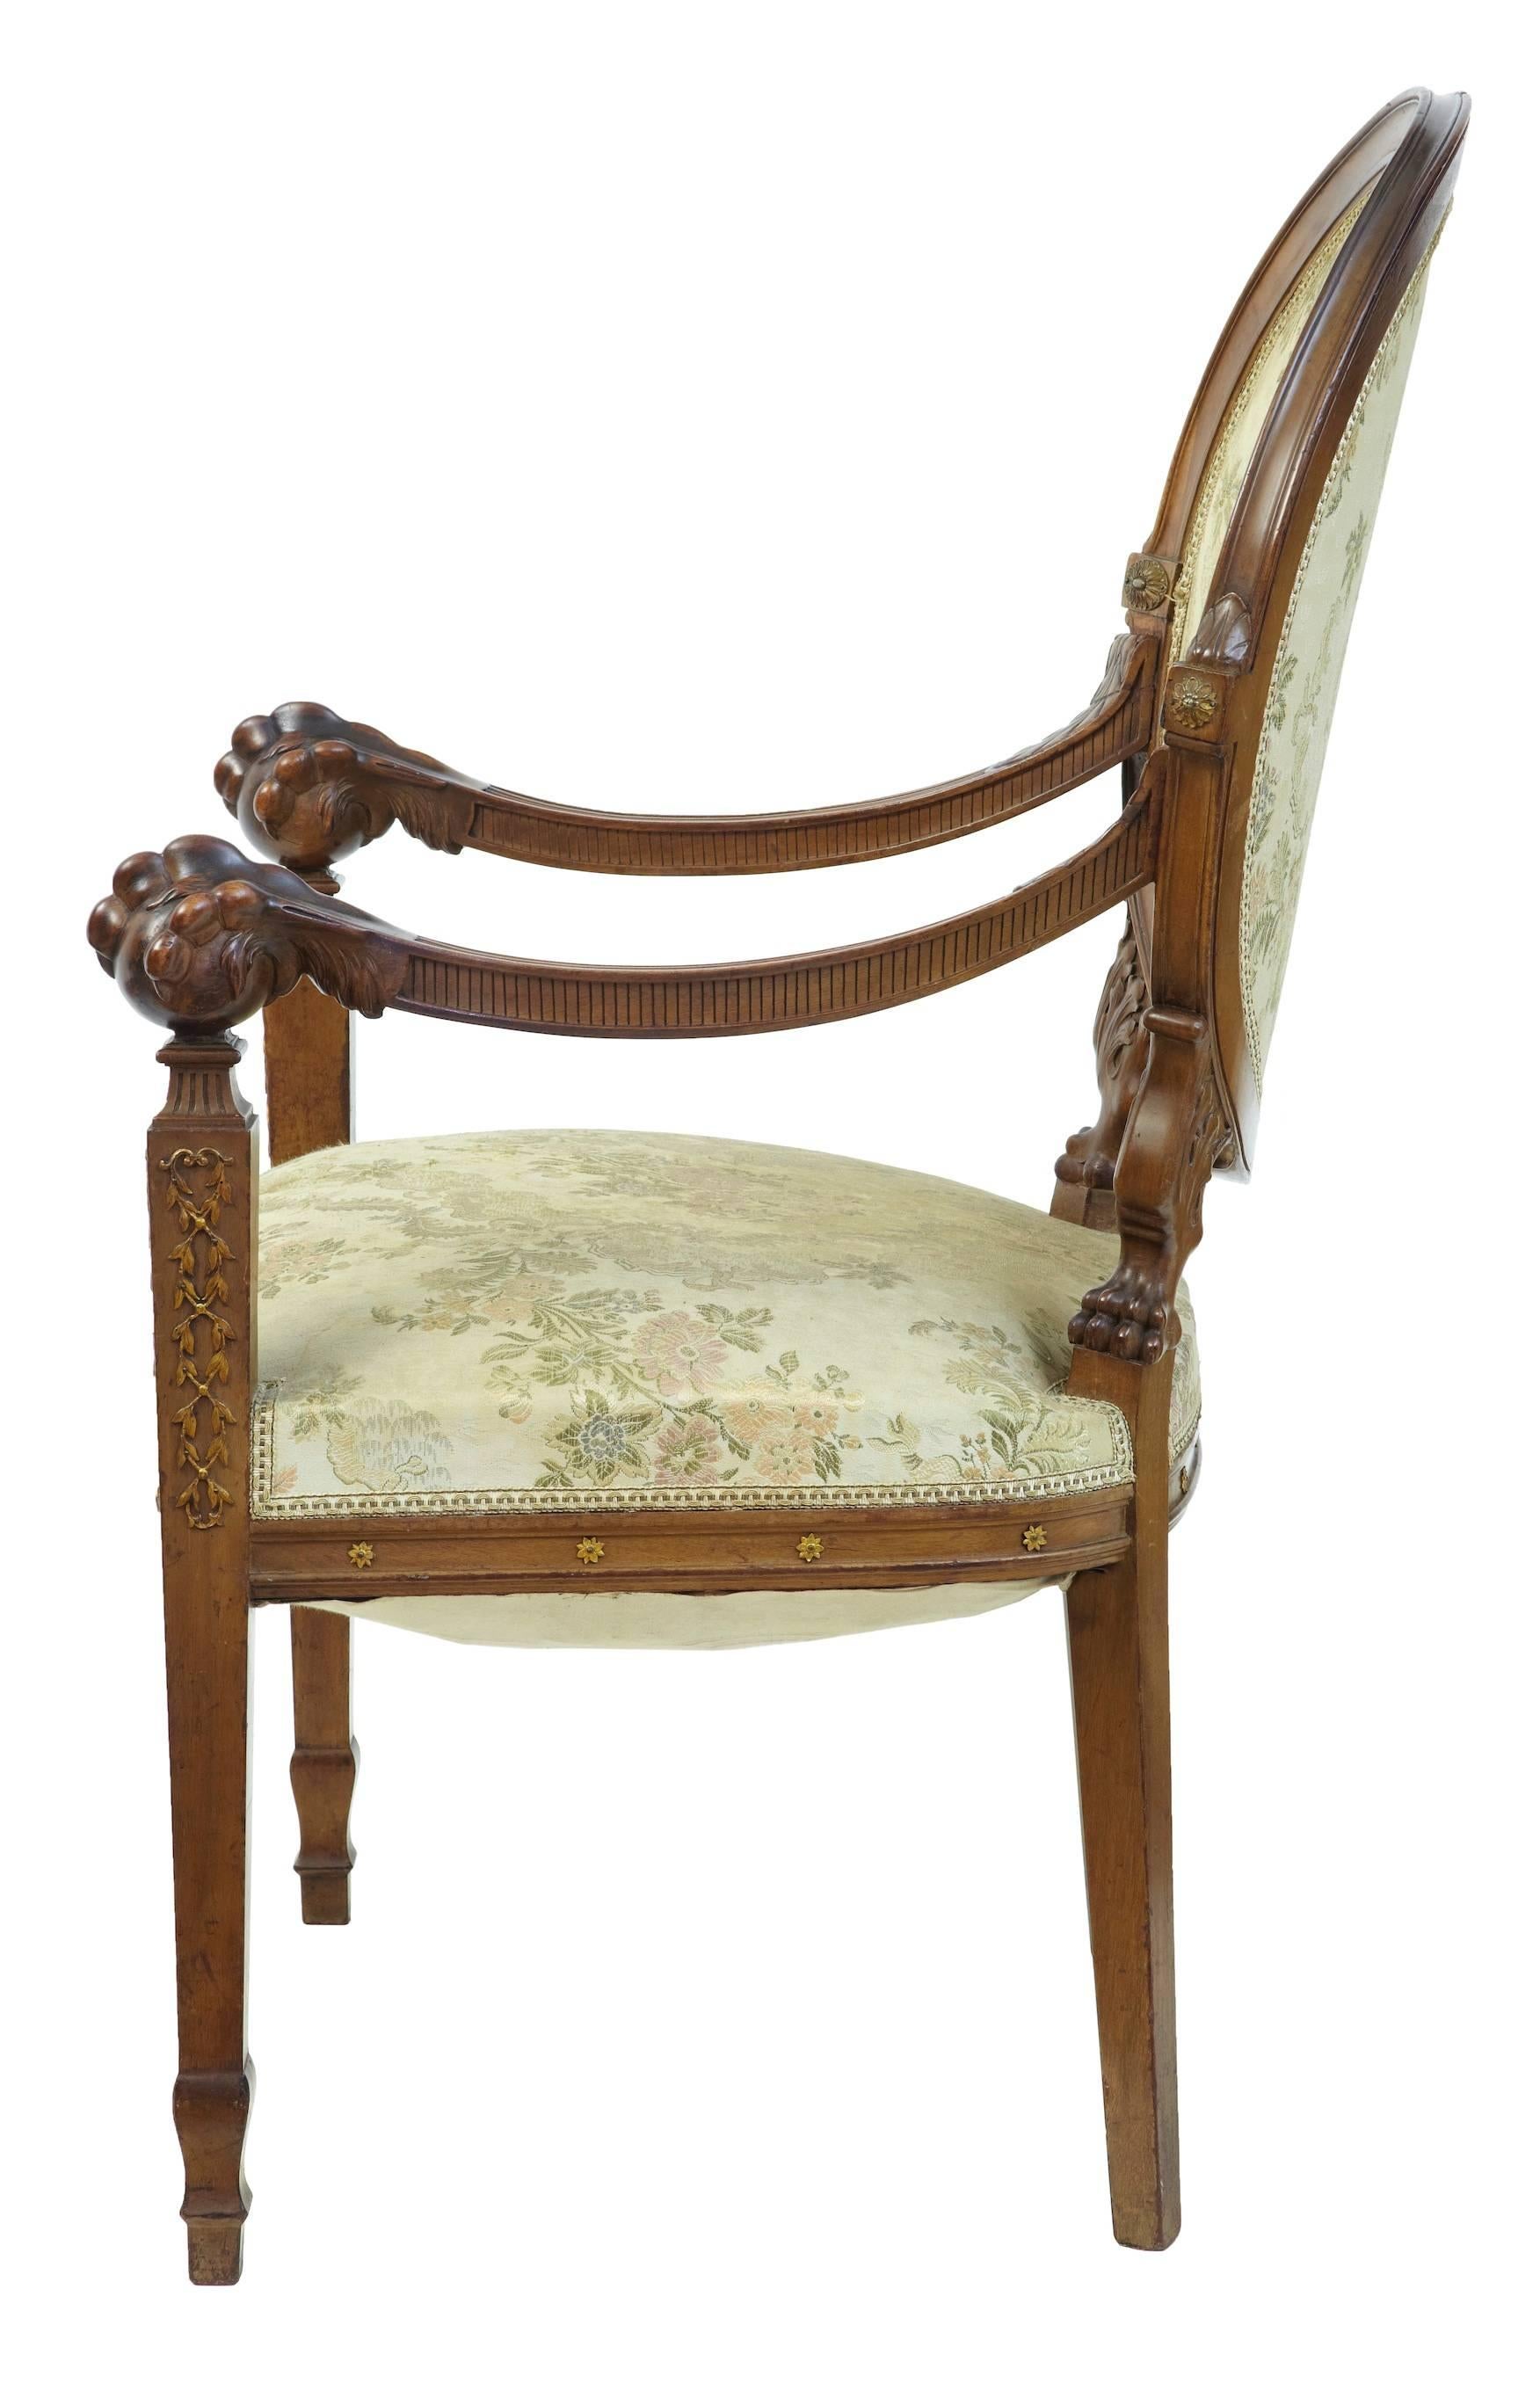 Good quality French armchair, circa 1870.
Beautifully carved ball and claw arms. Ormolu mounts to front legs.
Original upholstery in fair condition, some staining.
Small loss to back of head rest.

Measure: Height 39 3/4